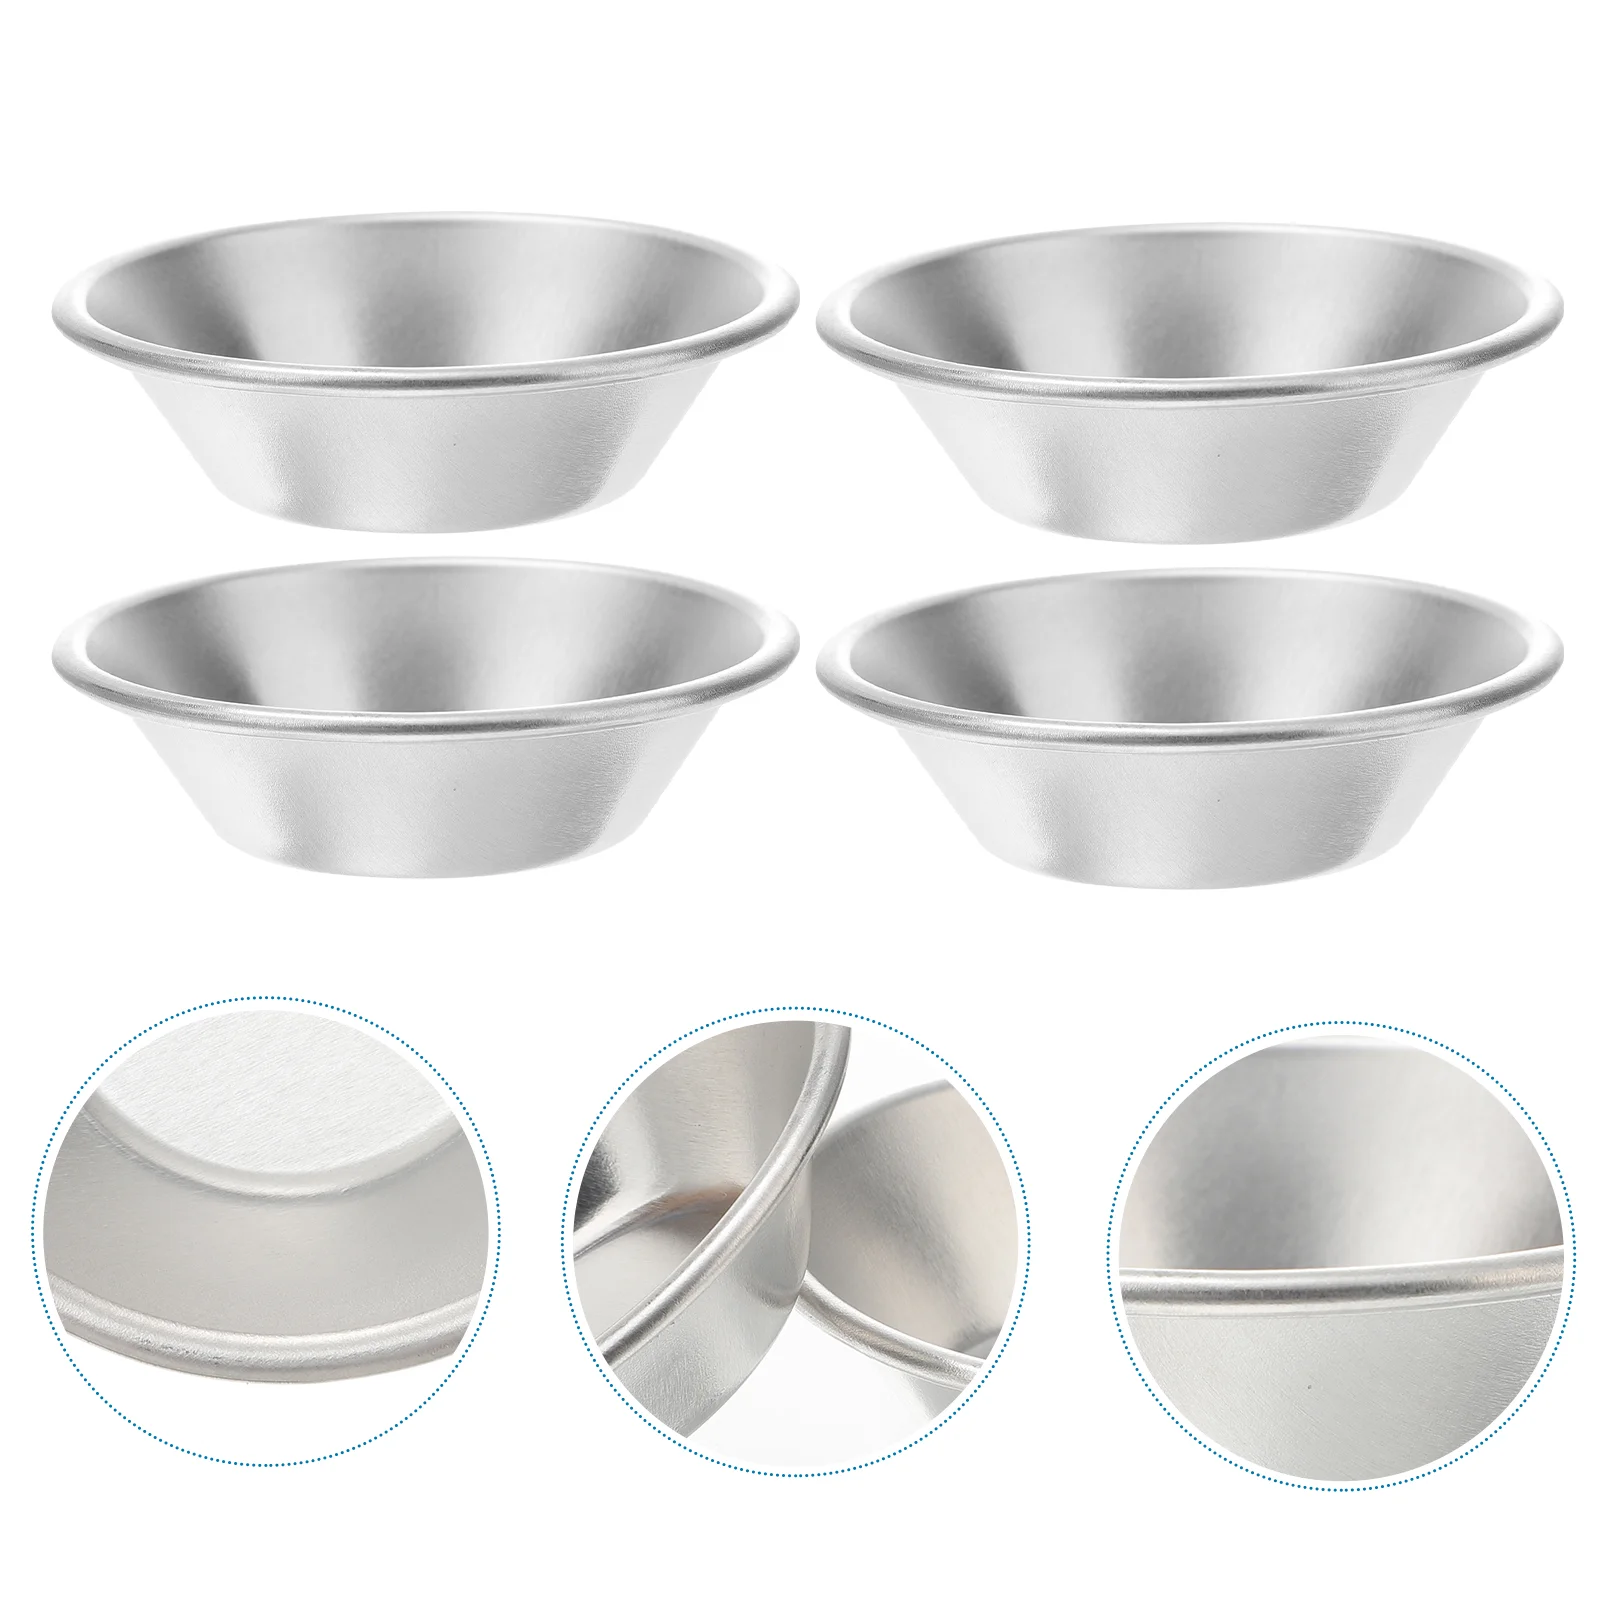 

Tart Egg Baking Molds Mini Pan Pans Pie Tin Muffin Mold Cups Tins Aluminum Cupcake Flower Cases Mould Cake Cup Moulds Bakeware